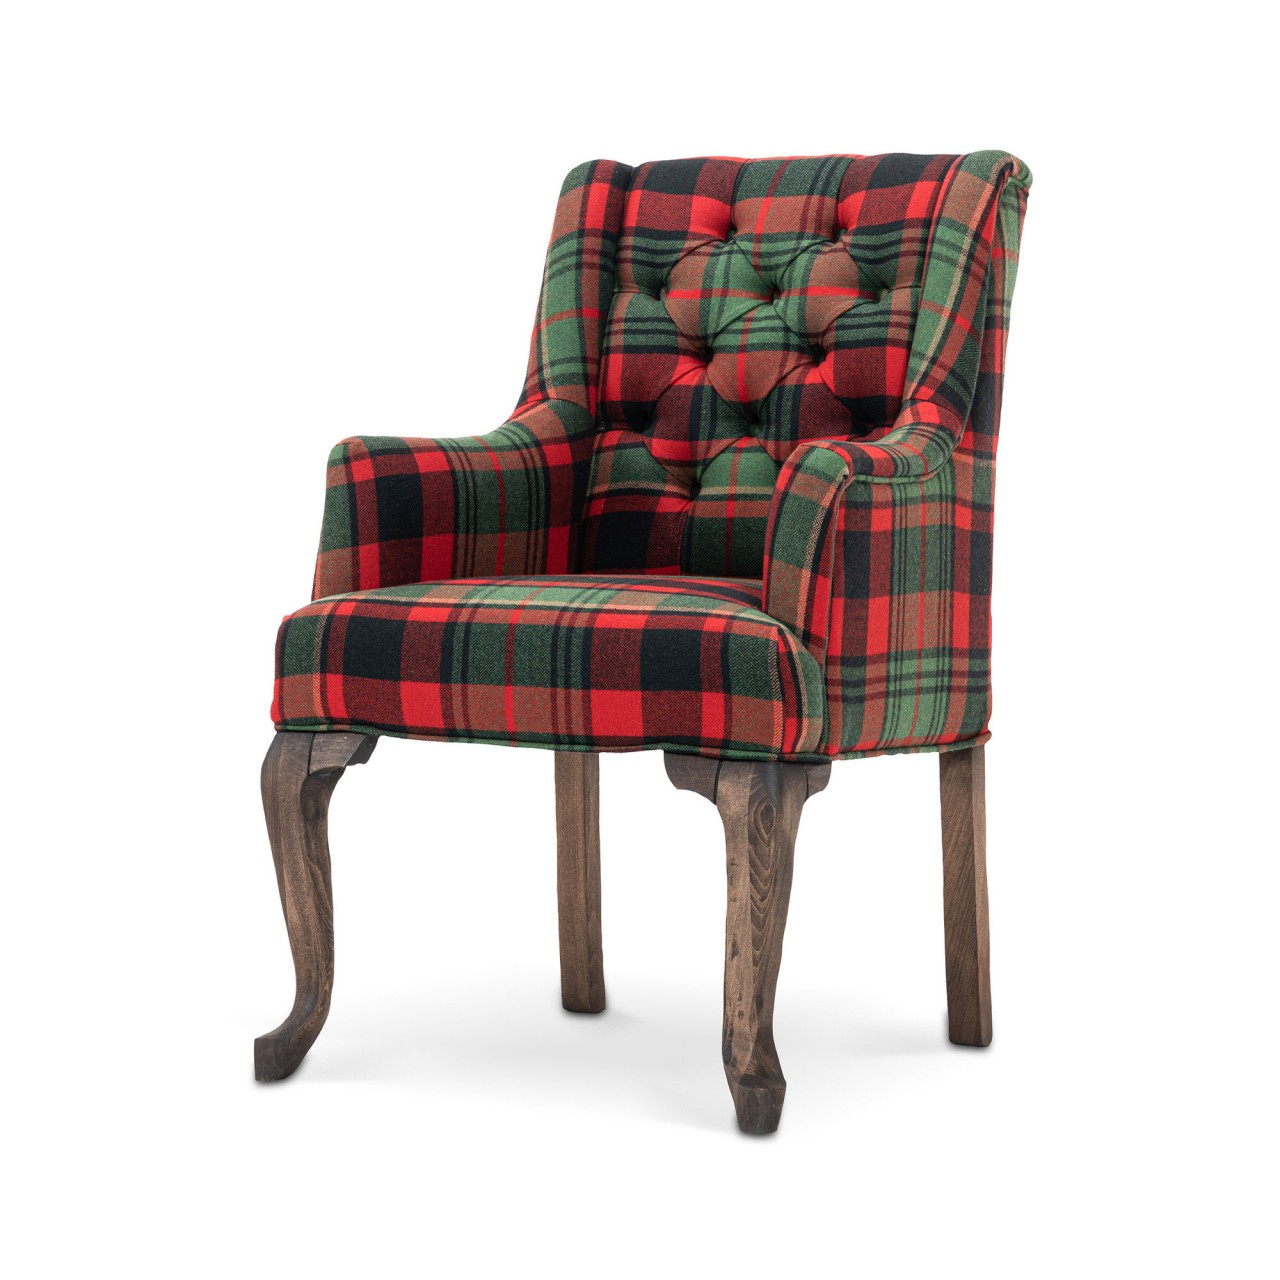 FITZROY TUFTED CHAIR - TYROLEAN PLAID fabric